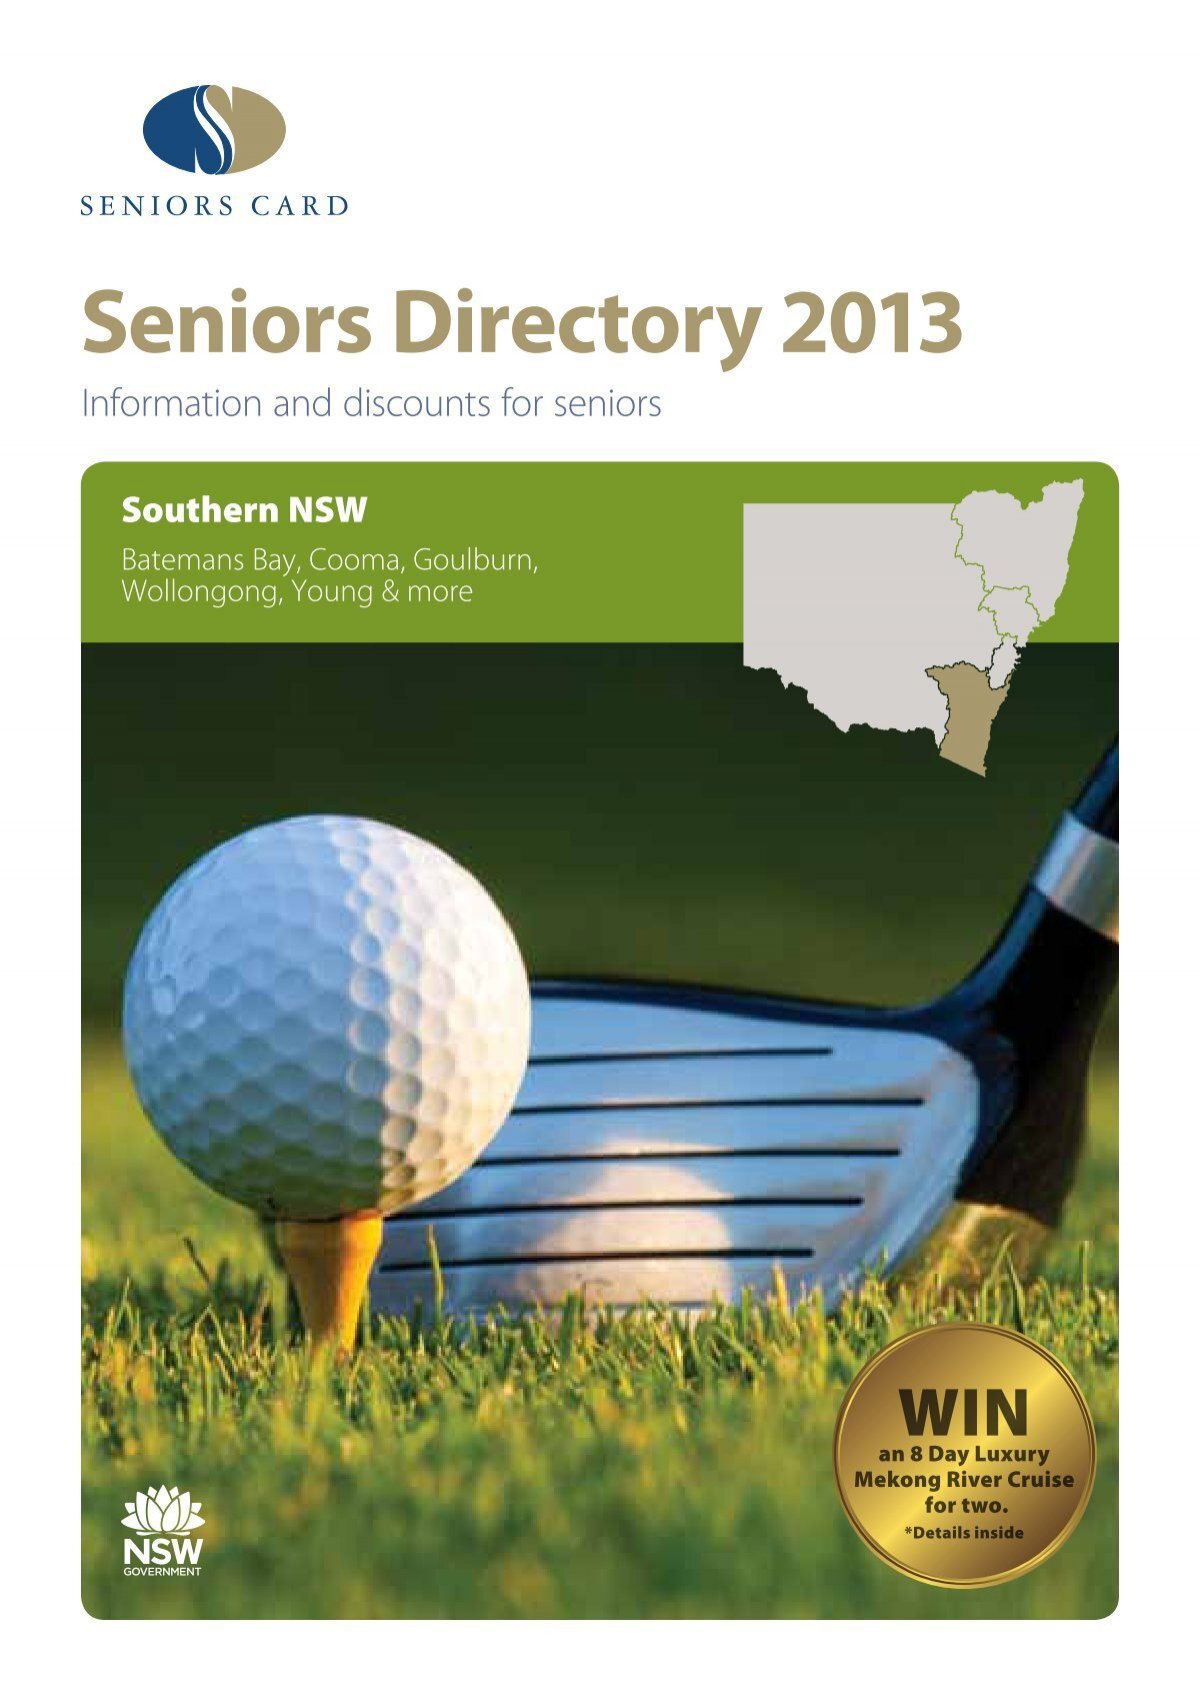 southern-directory-seniors-card-nsw-government